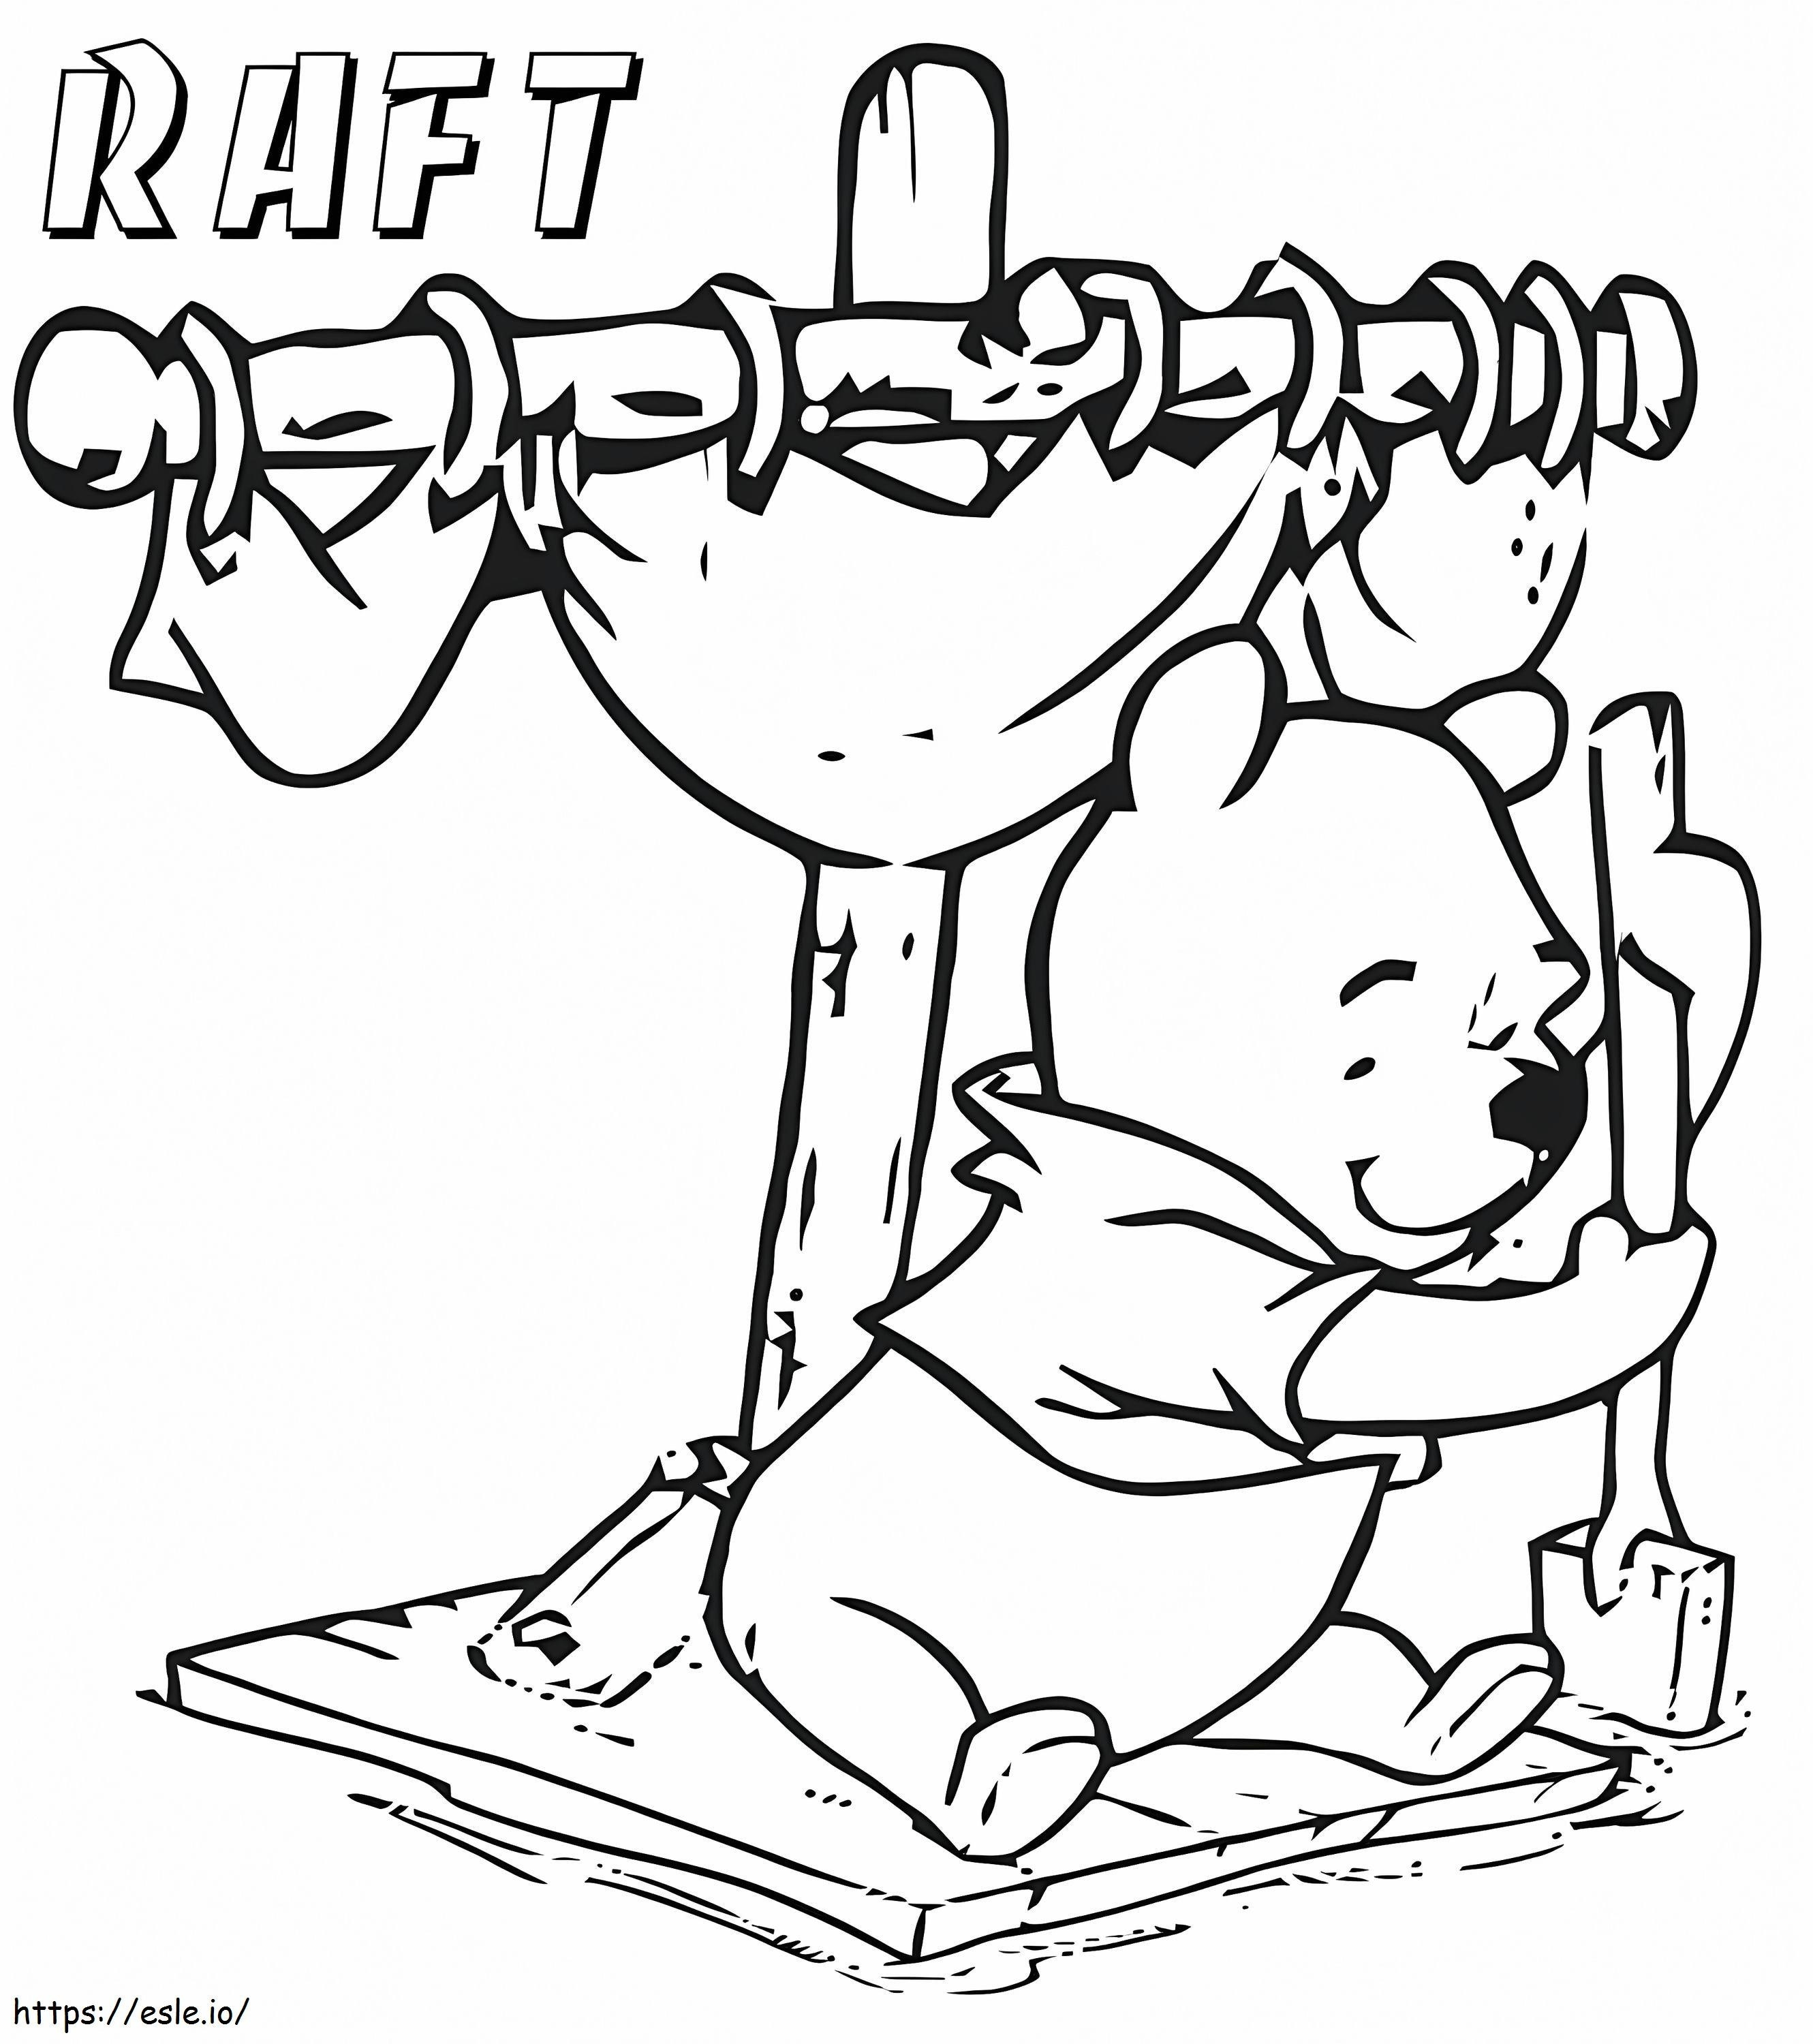 Pooh On Raft coloring page